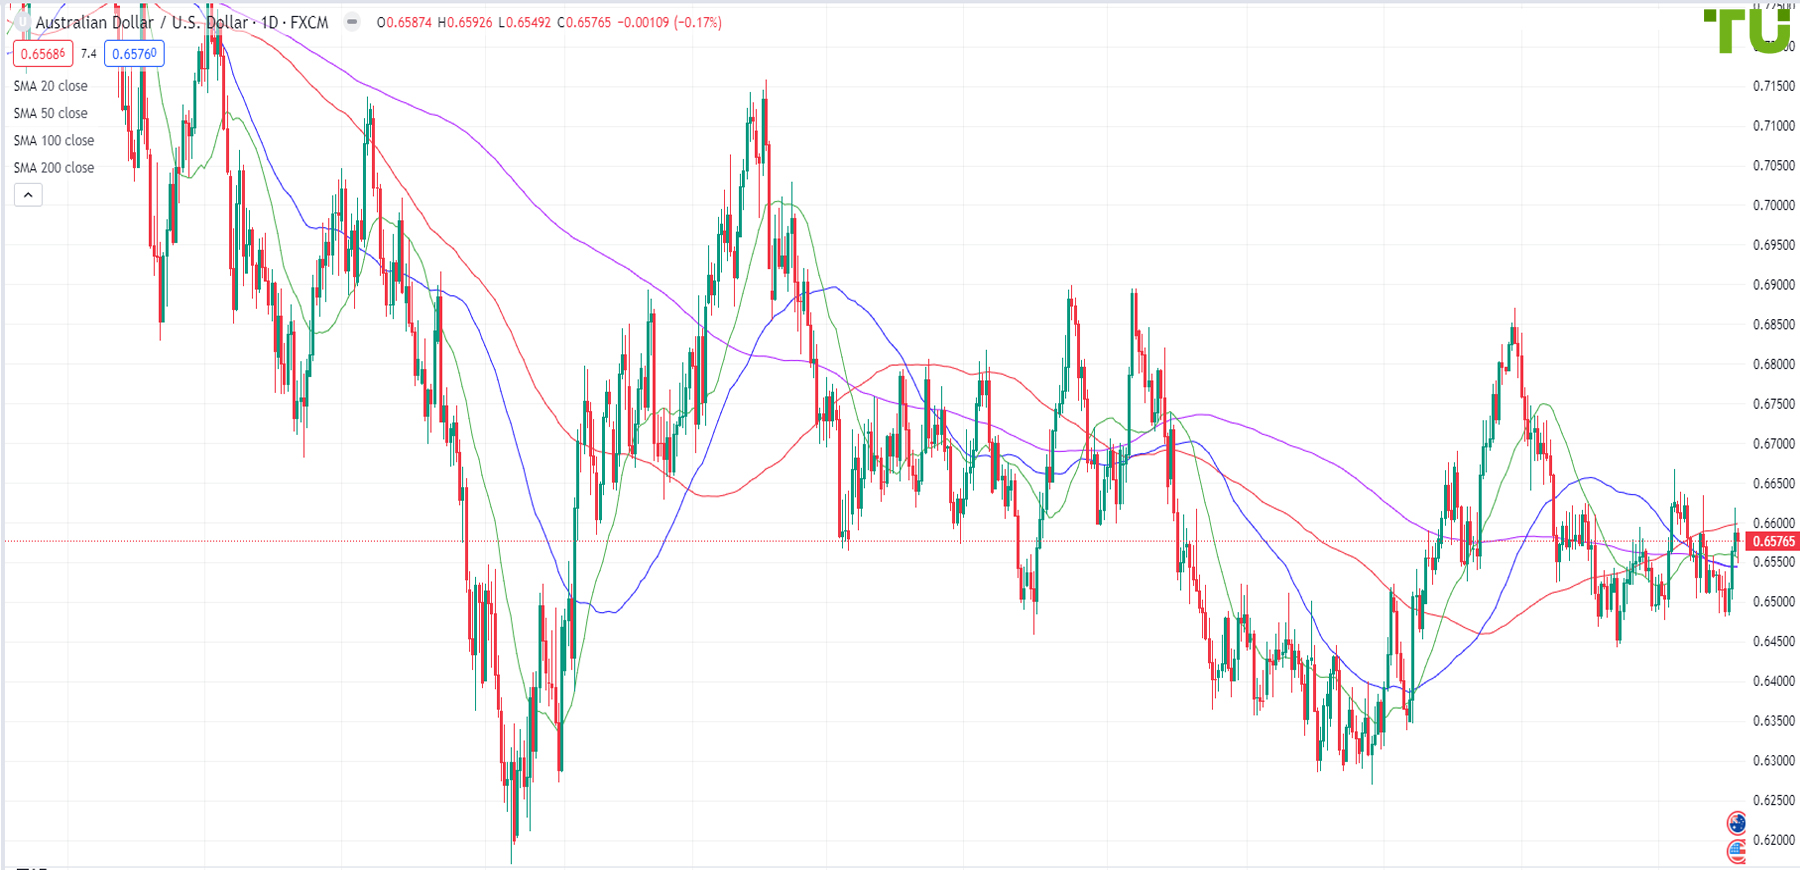 Aussie/dollar bought from 0.6550; downside risks persist